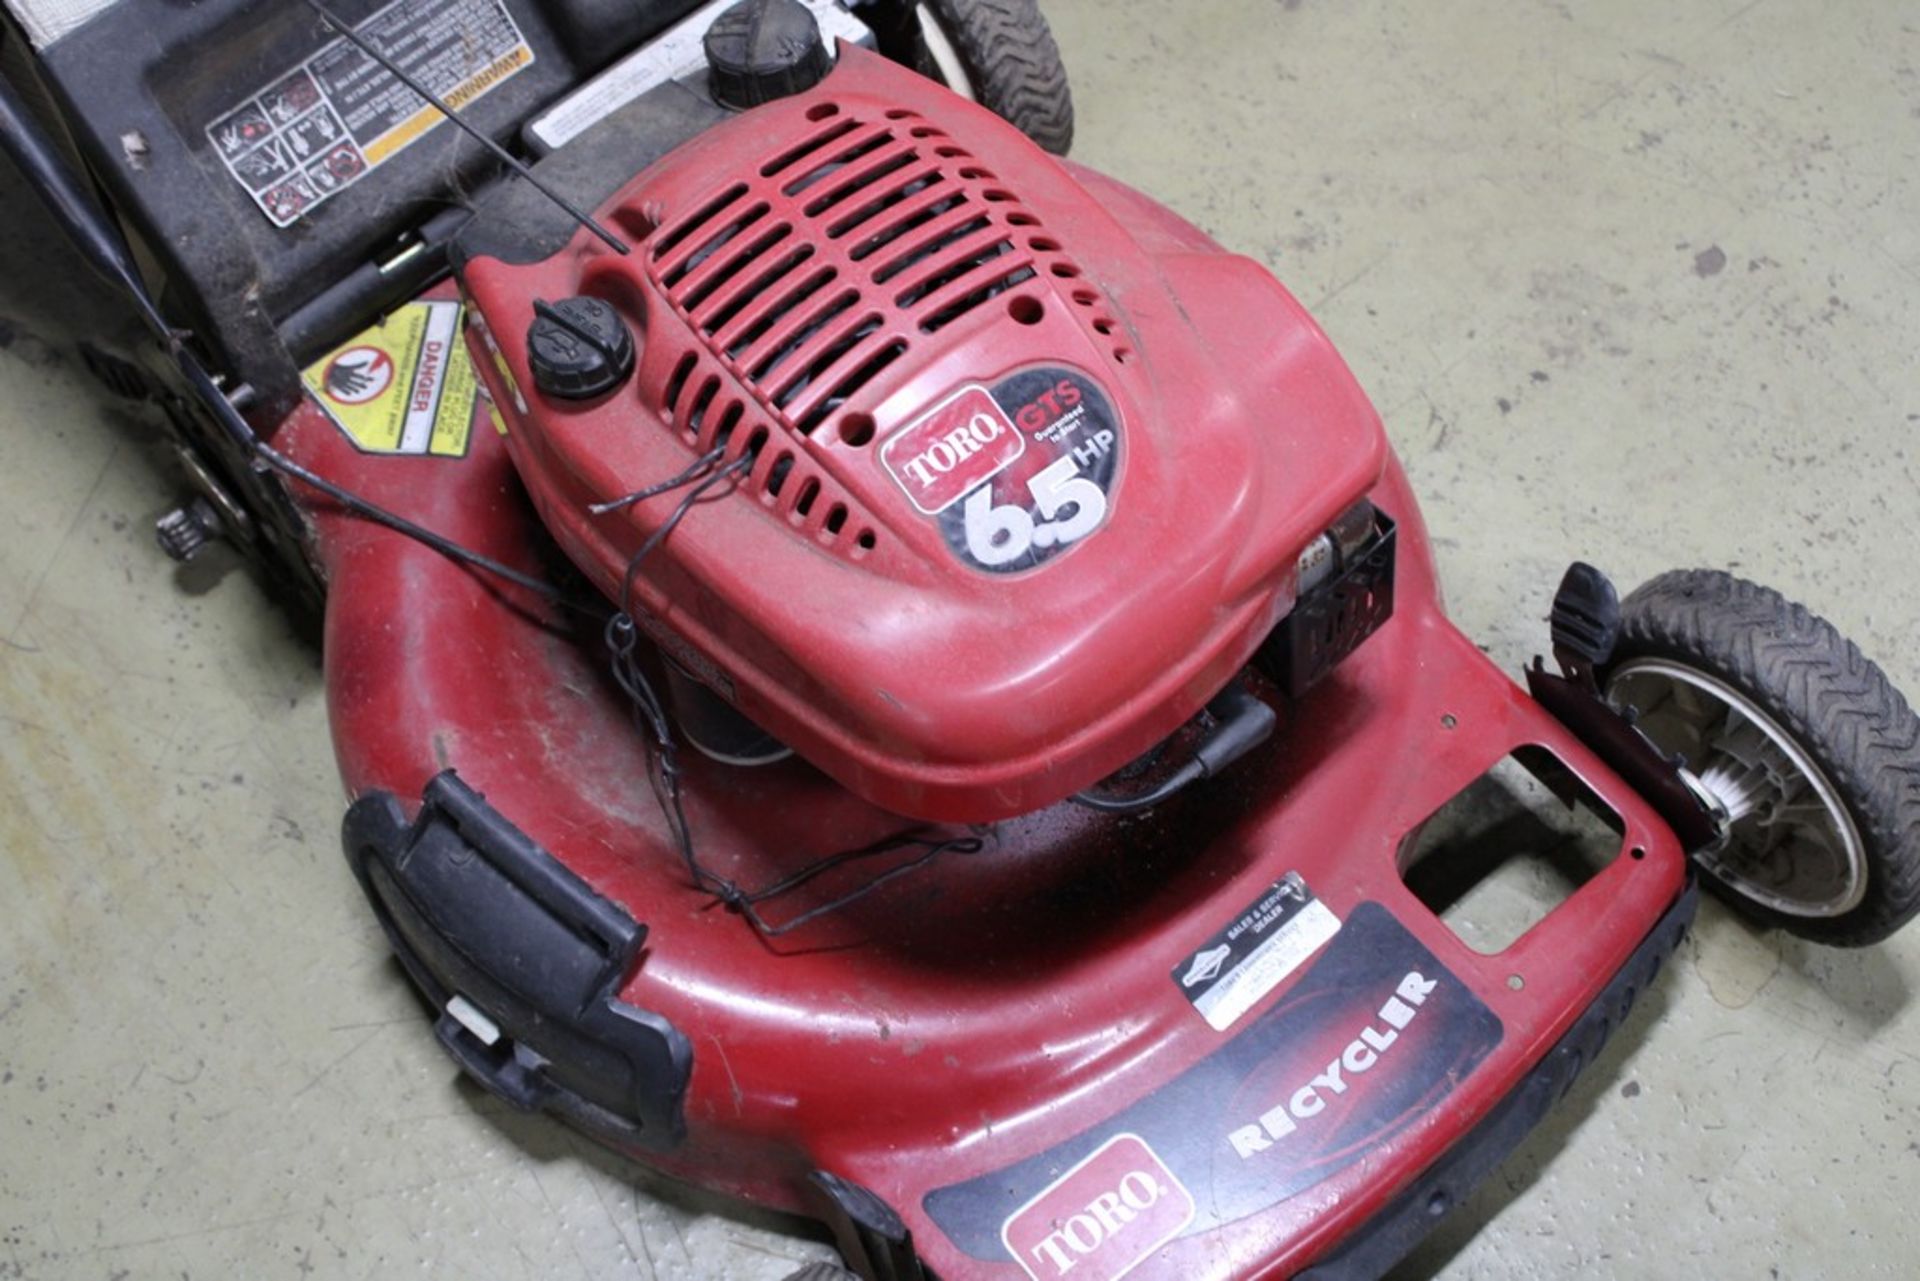 TORO GTS "RECYCLER" GAS SELF-PROPELLED LAWN MOWER, WITH 6.5 HP ENGINE (MISSING REAR WHEEL) - Image 2 of 3